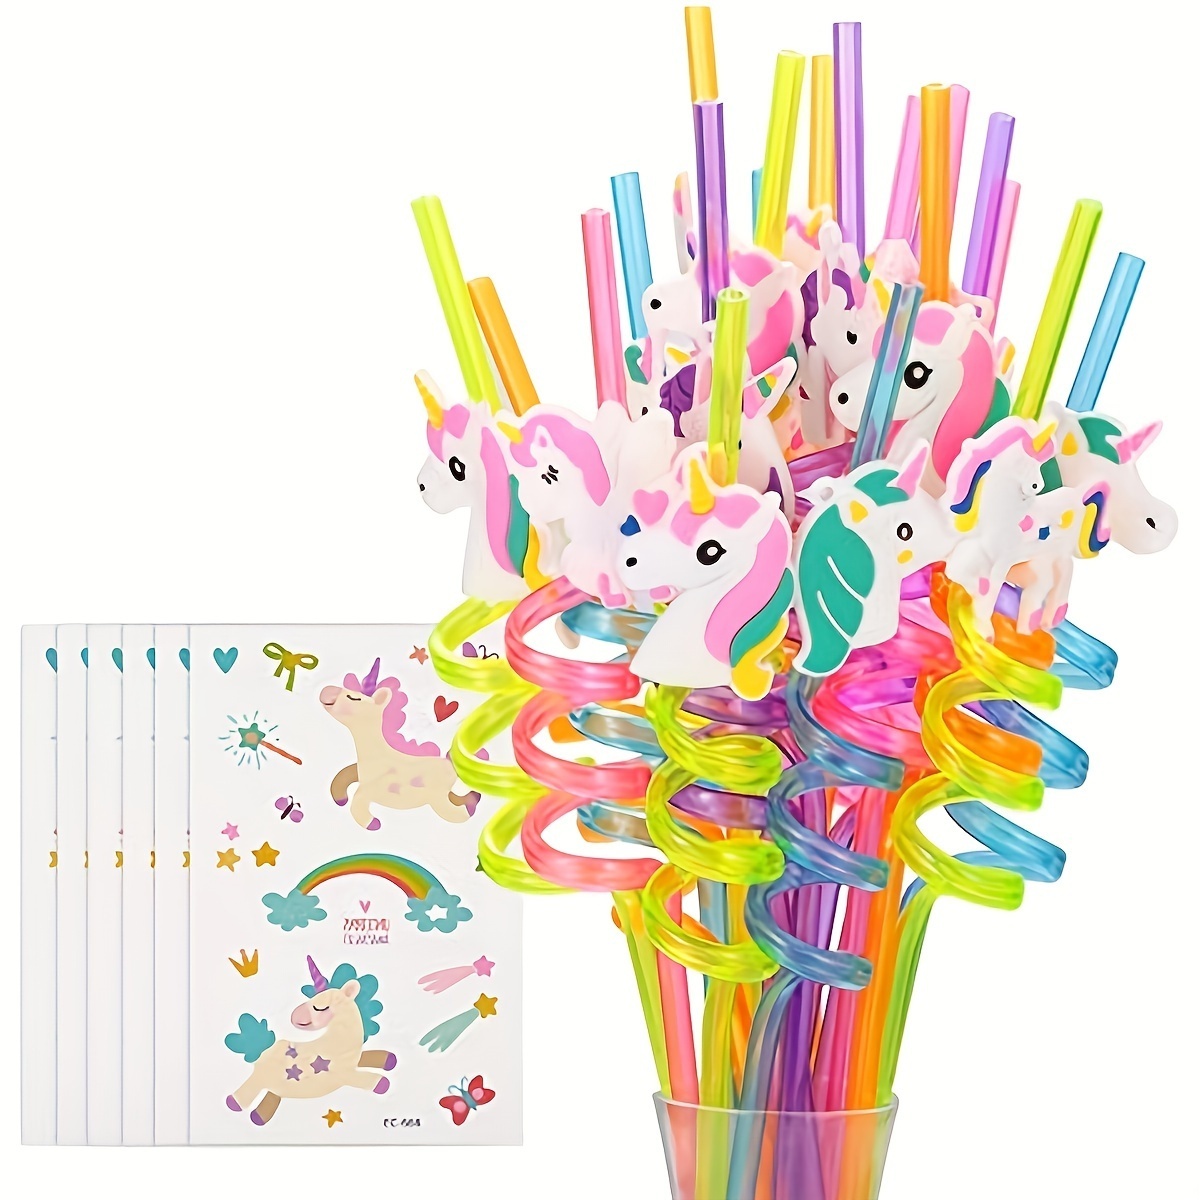 

Set, 12 Reusable Cute Drinking Plastic Straws + 6 Cute Temporary Tattoos | Cute Birthday Party Supplies - Rainbow Cute Party Favors Decorations With 2 Cleaning Brush